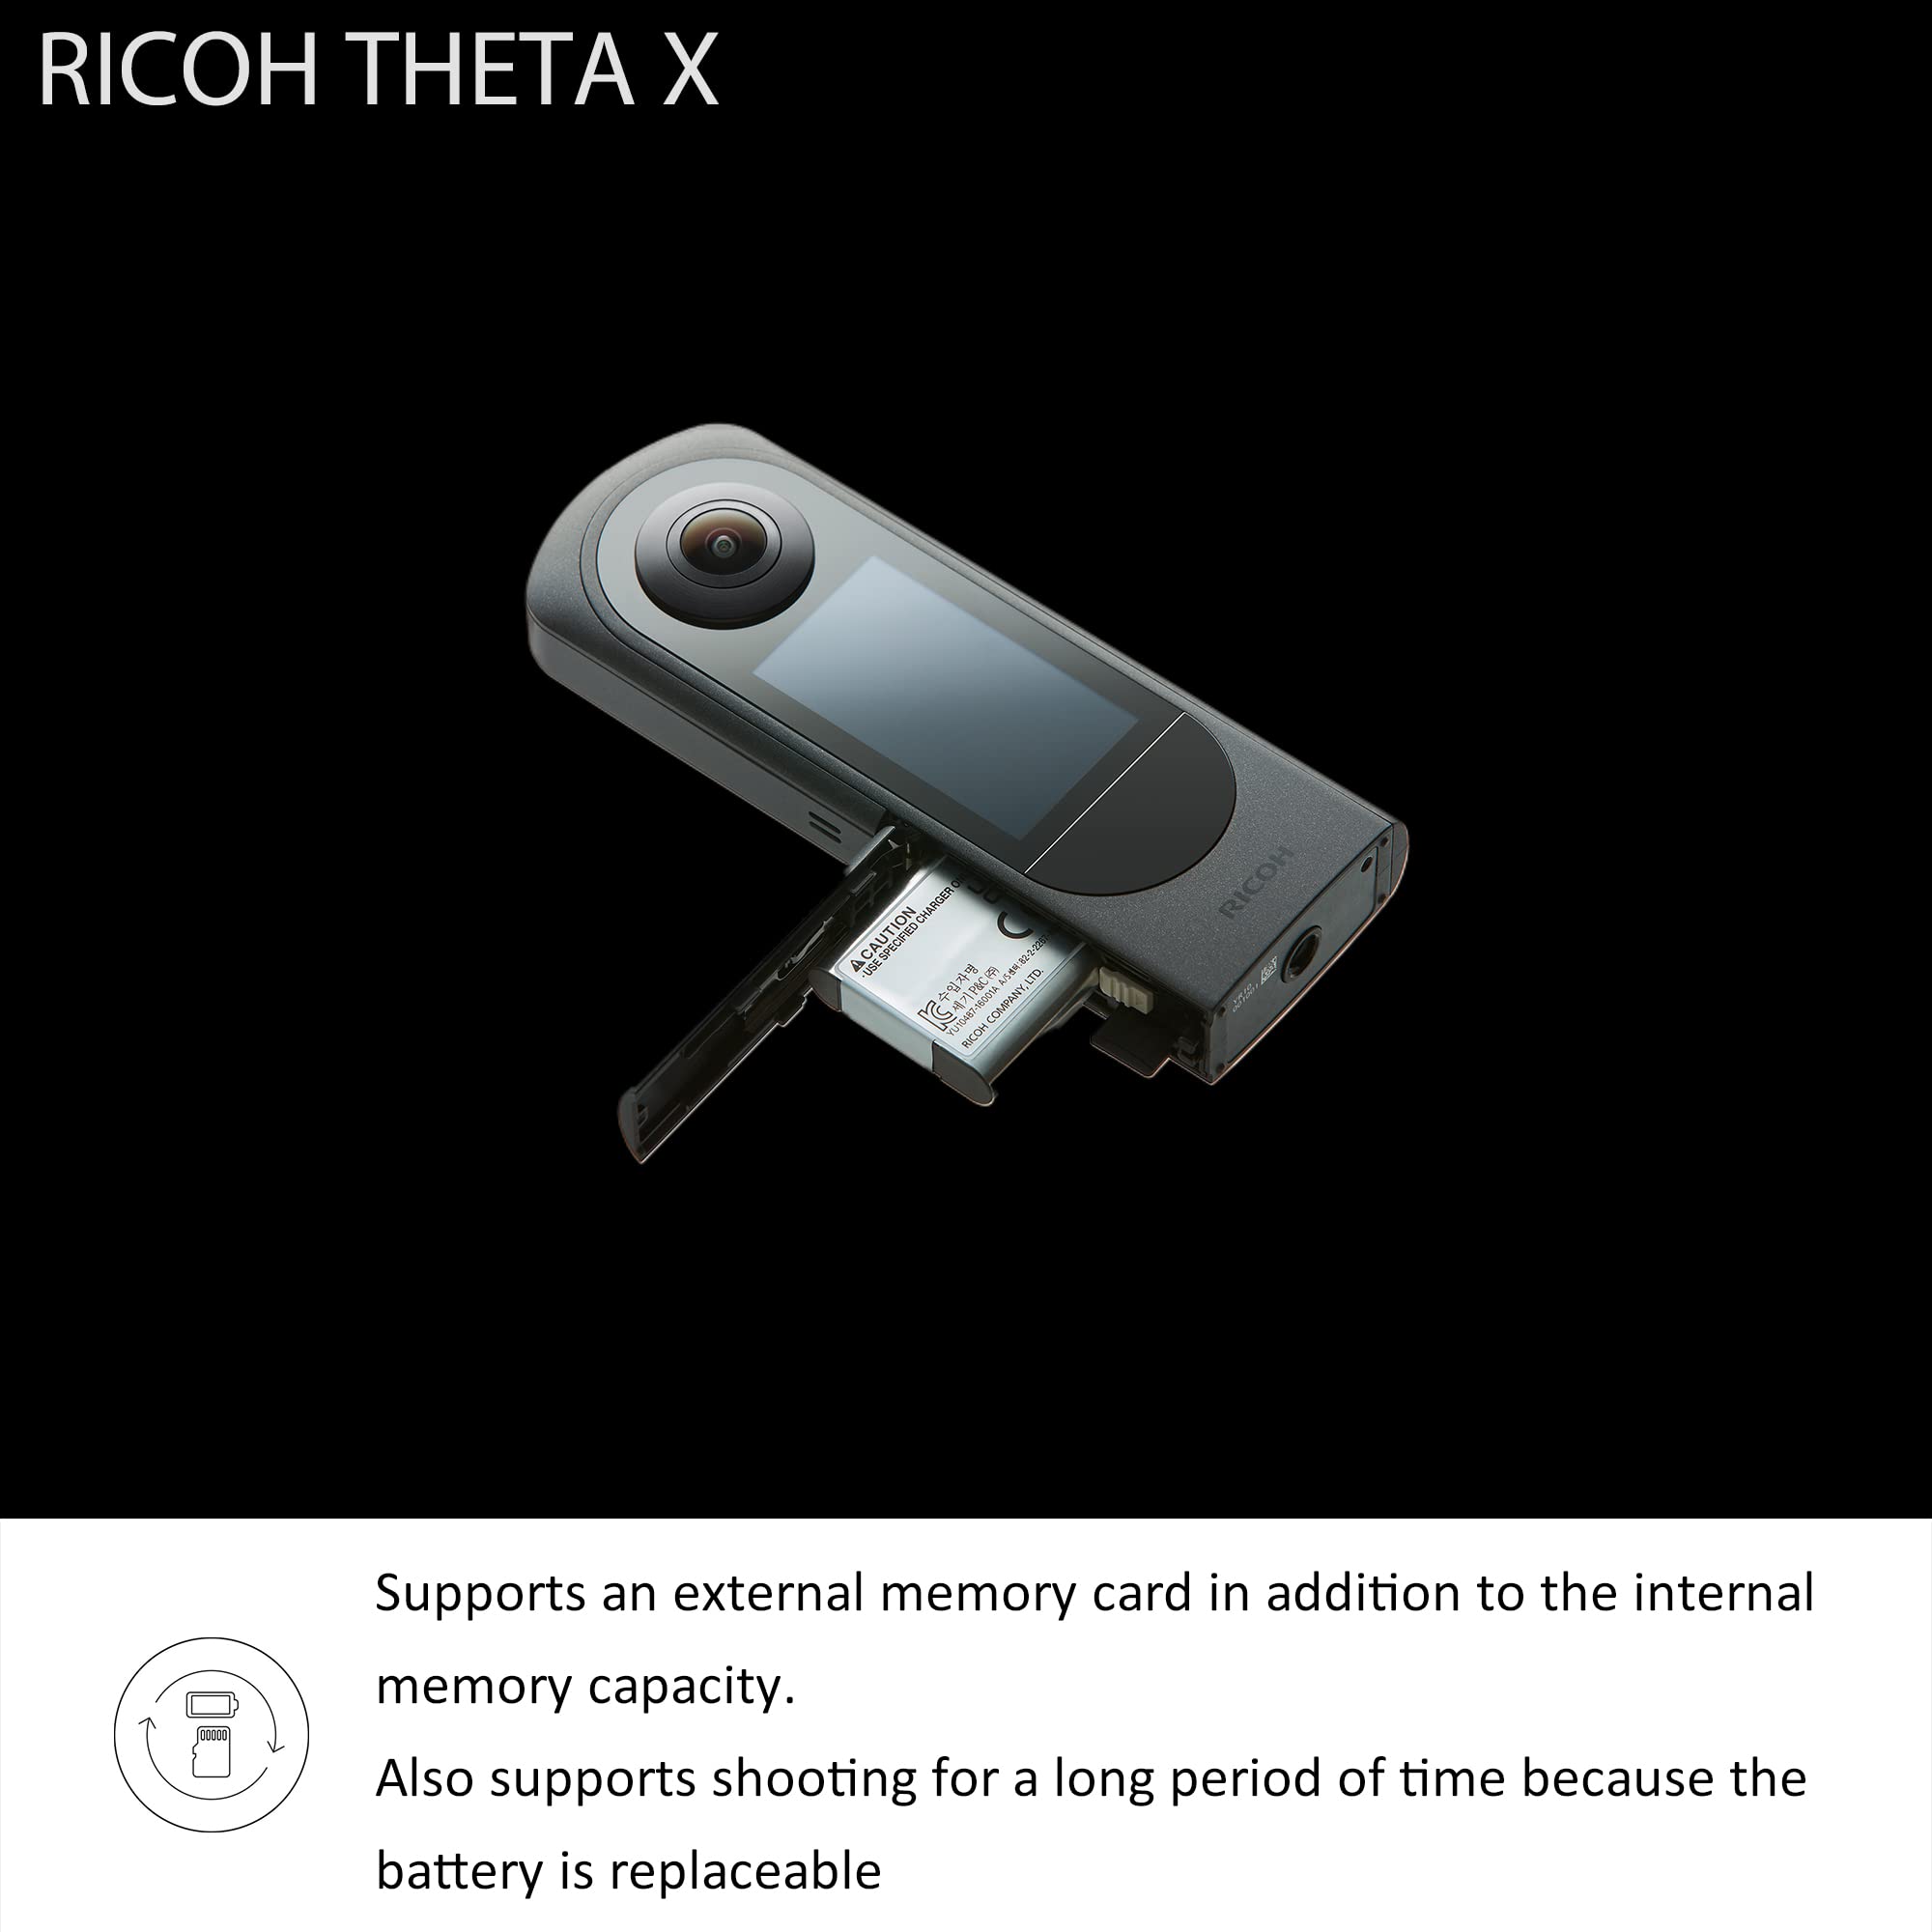 Ricoh Theta X 360 Degree Camera, High Resolution Image of approximate 60M, 5.7K 360, Touch Screen